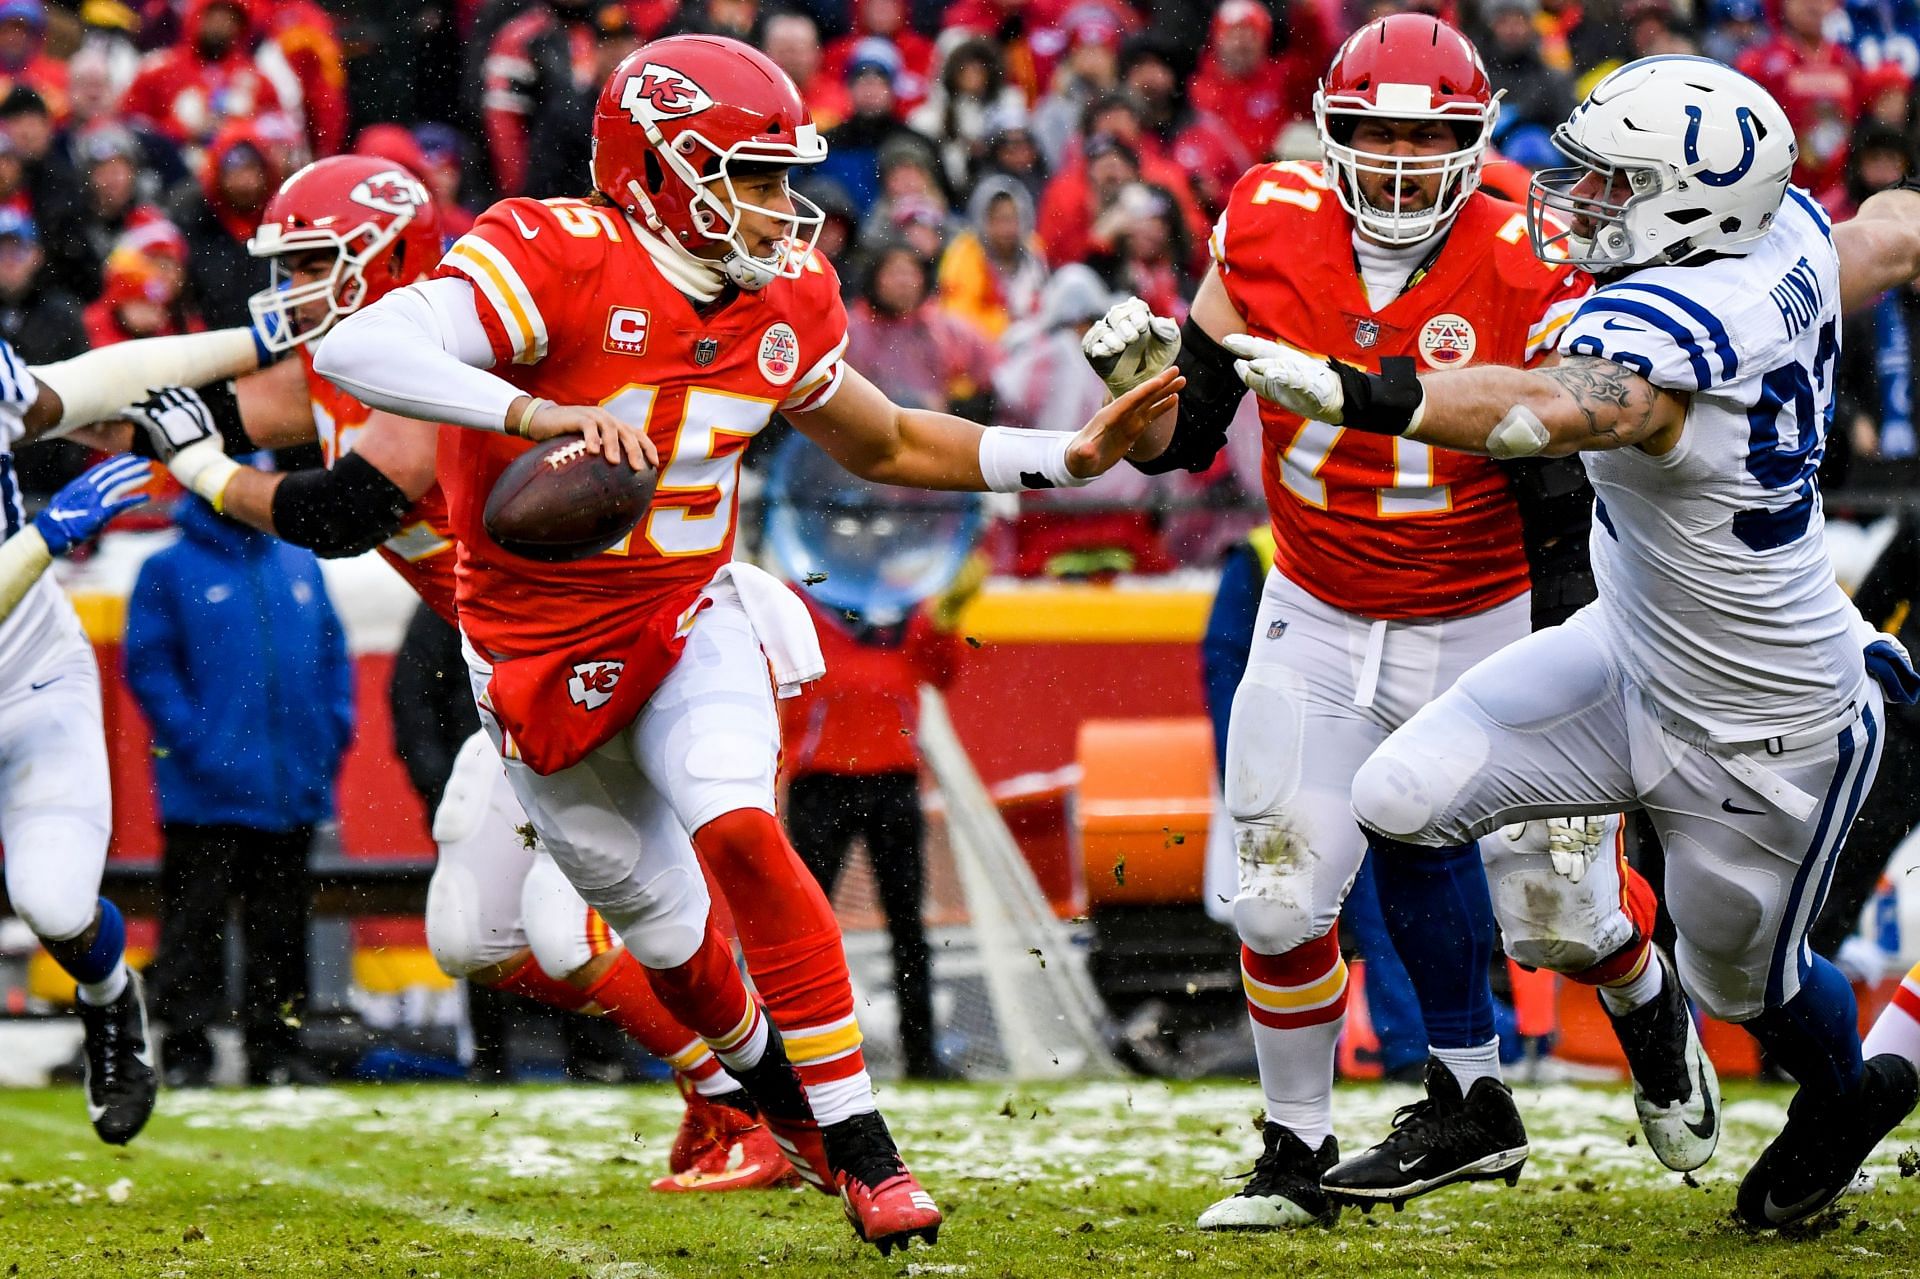 Mahomes escapes the Colts pass rushers